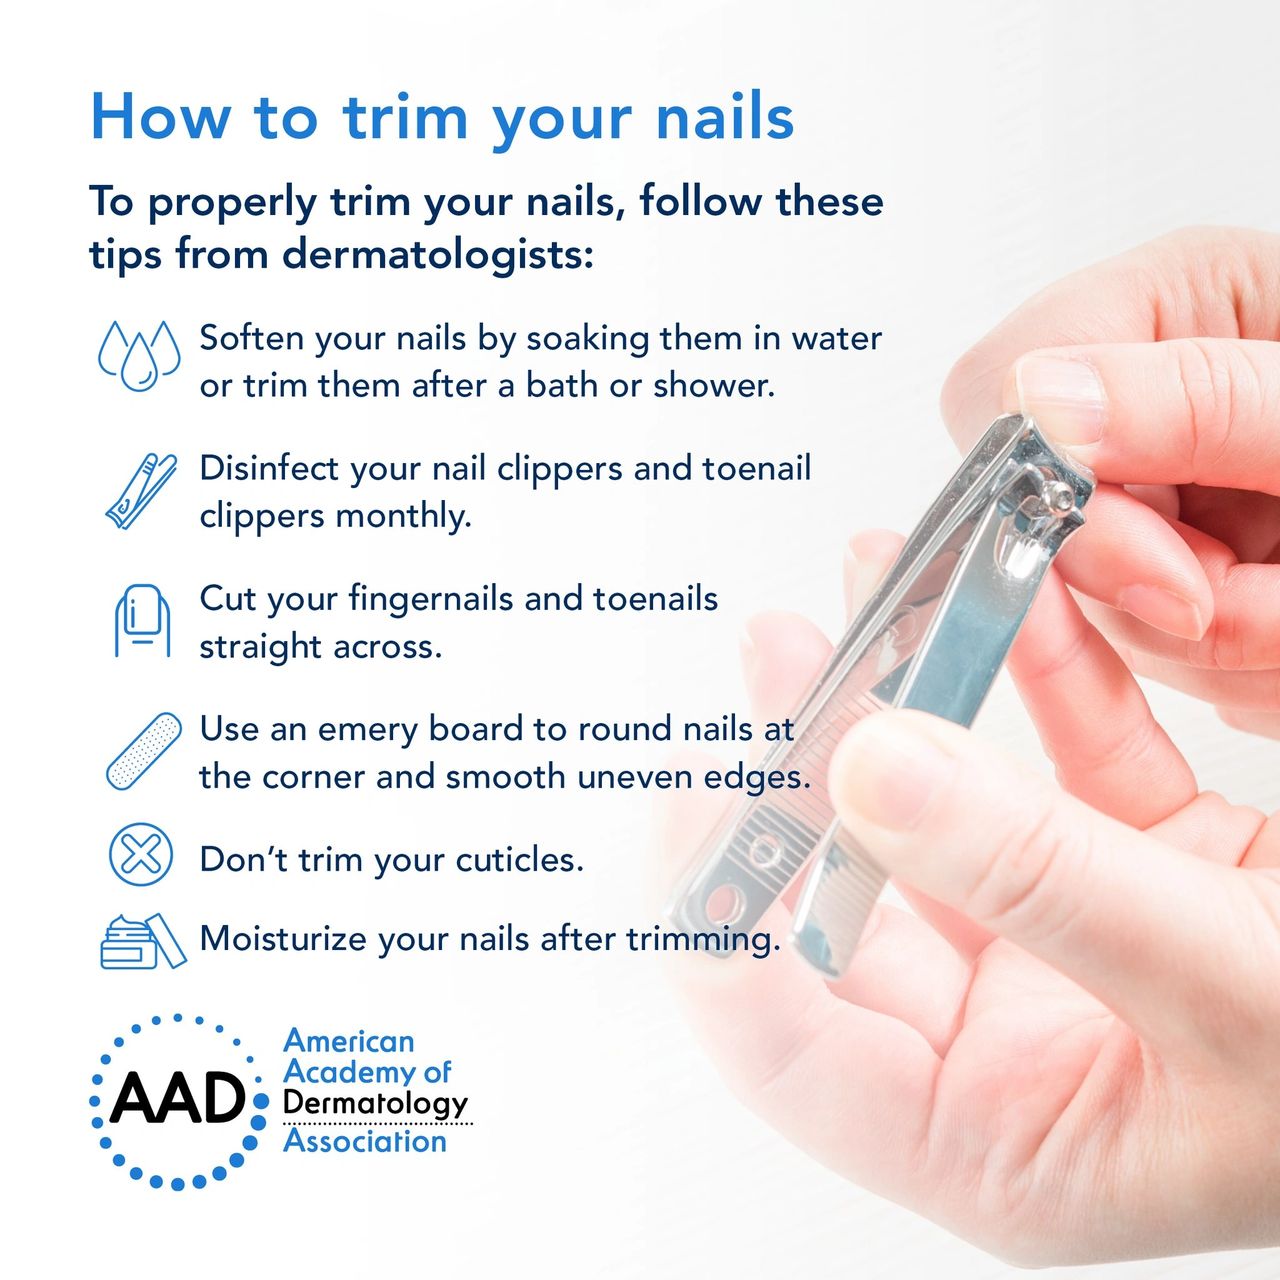 How to trim your nails